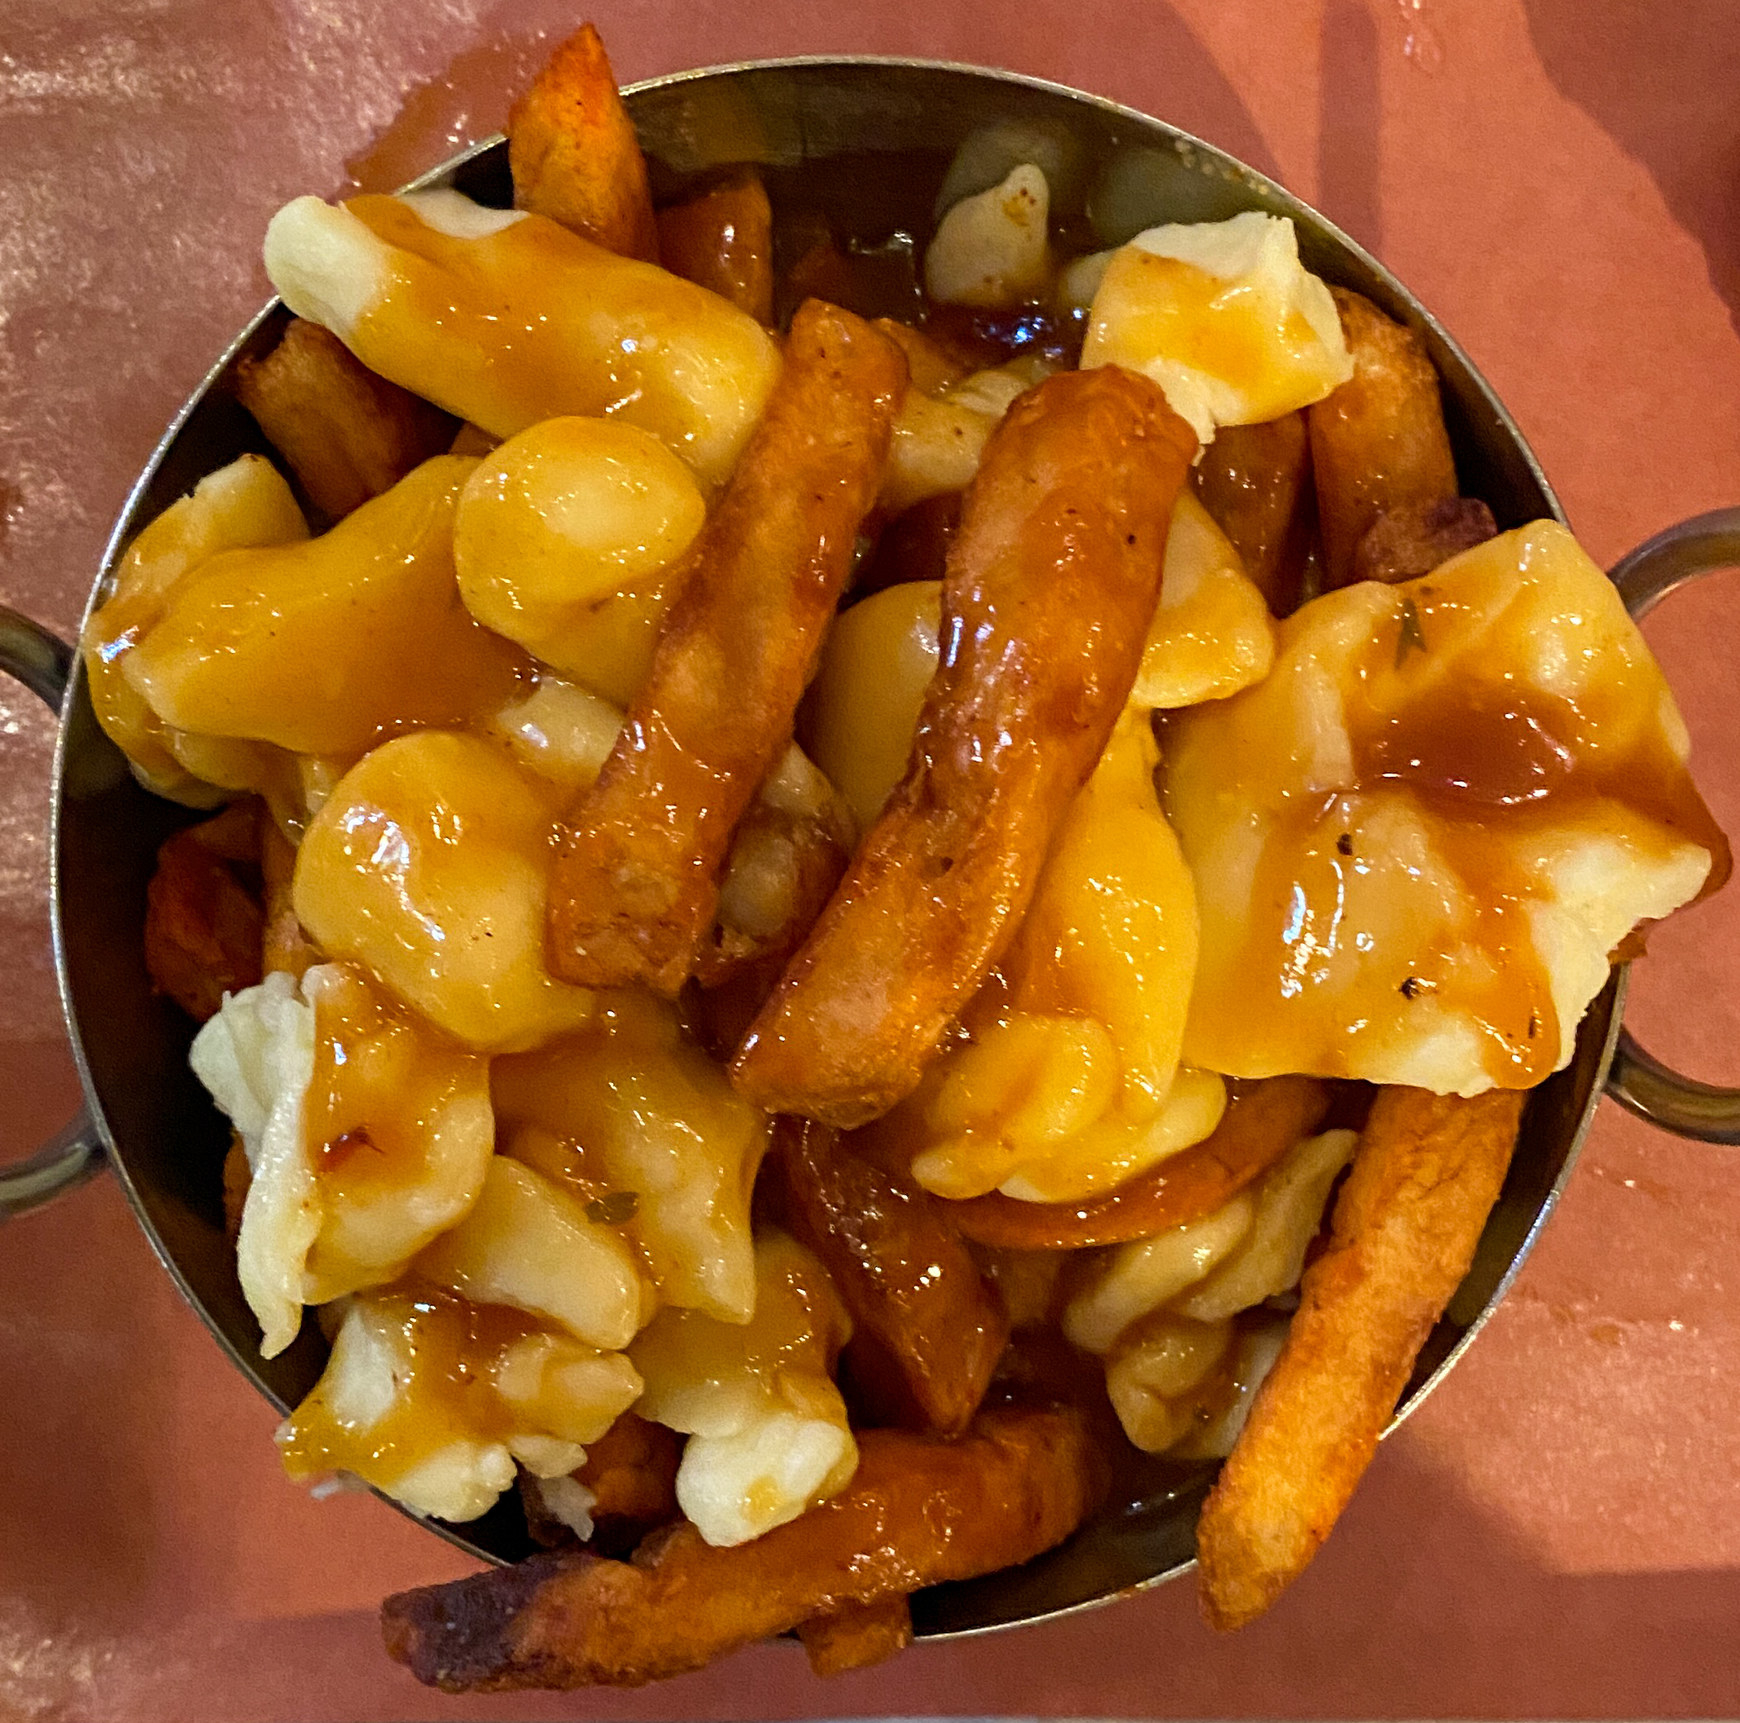 A bowl of Canadian poutine